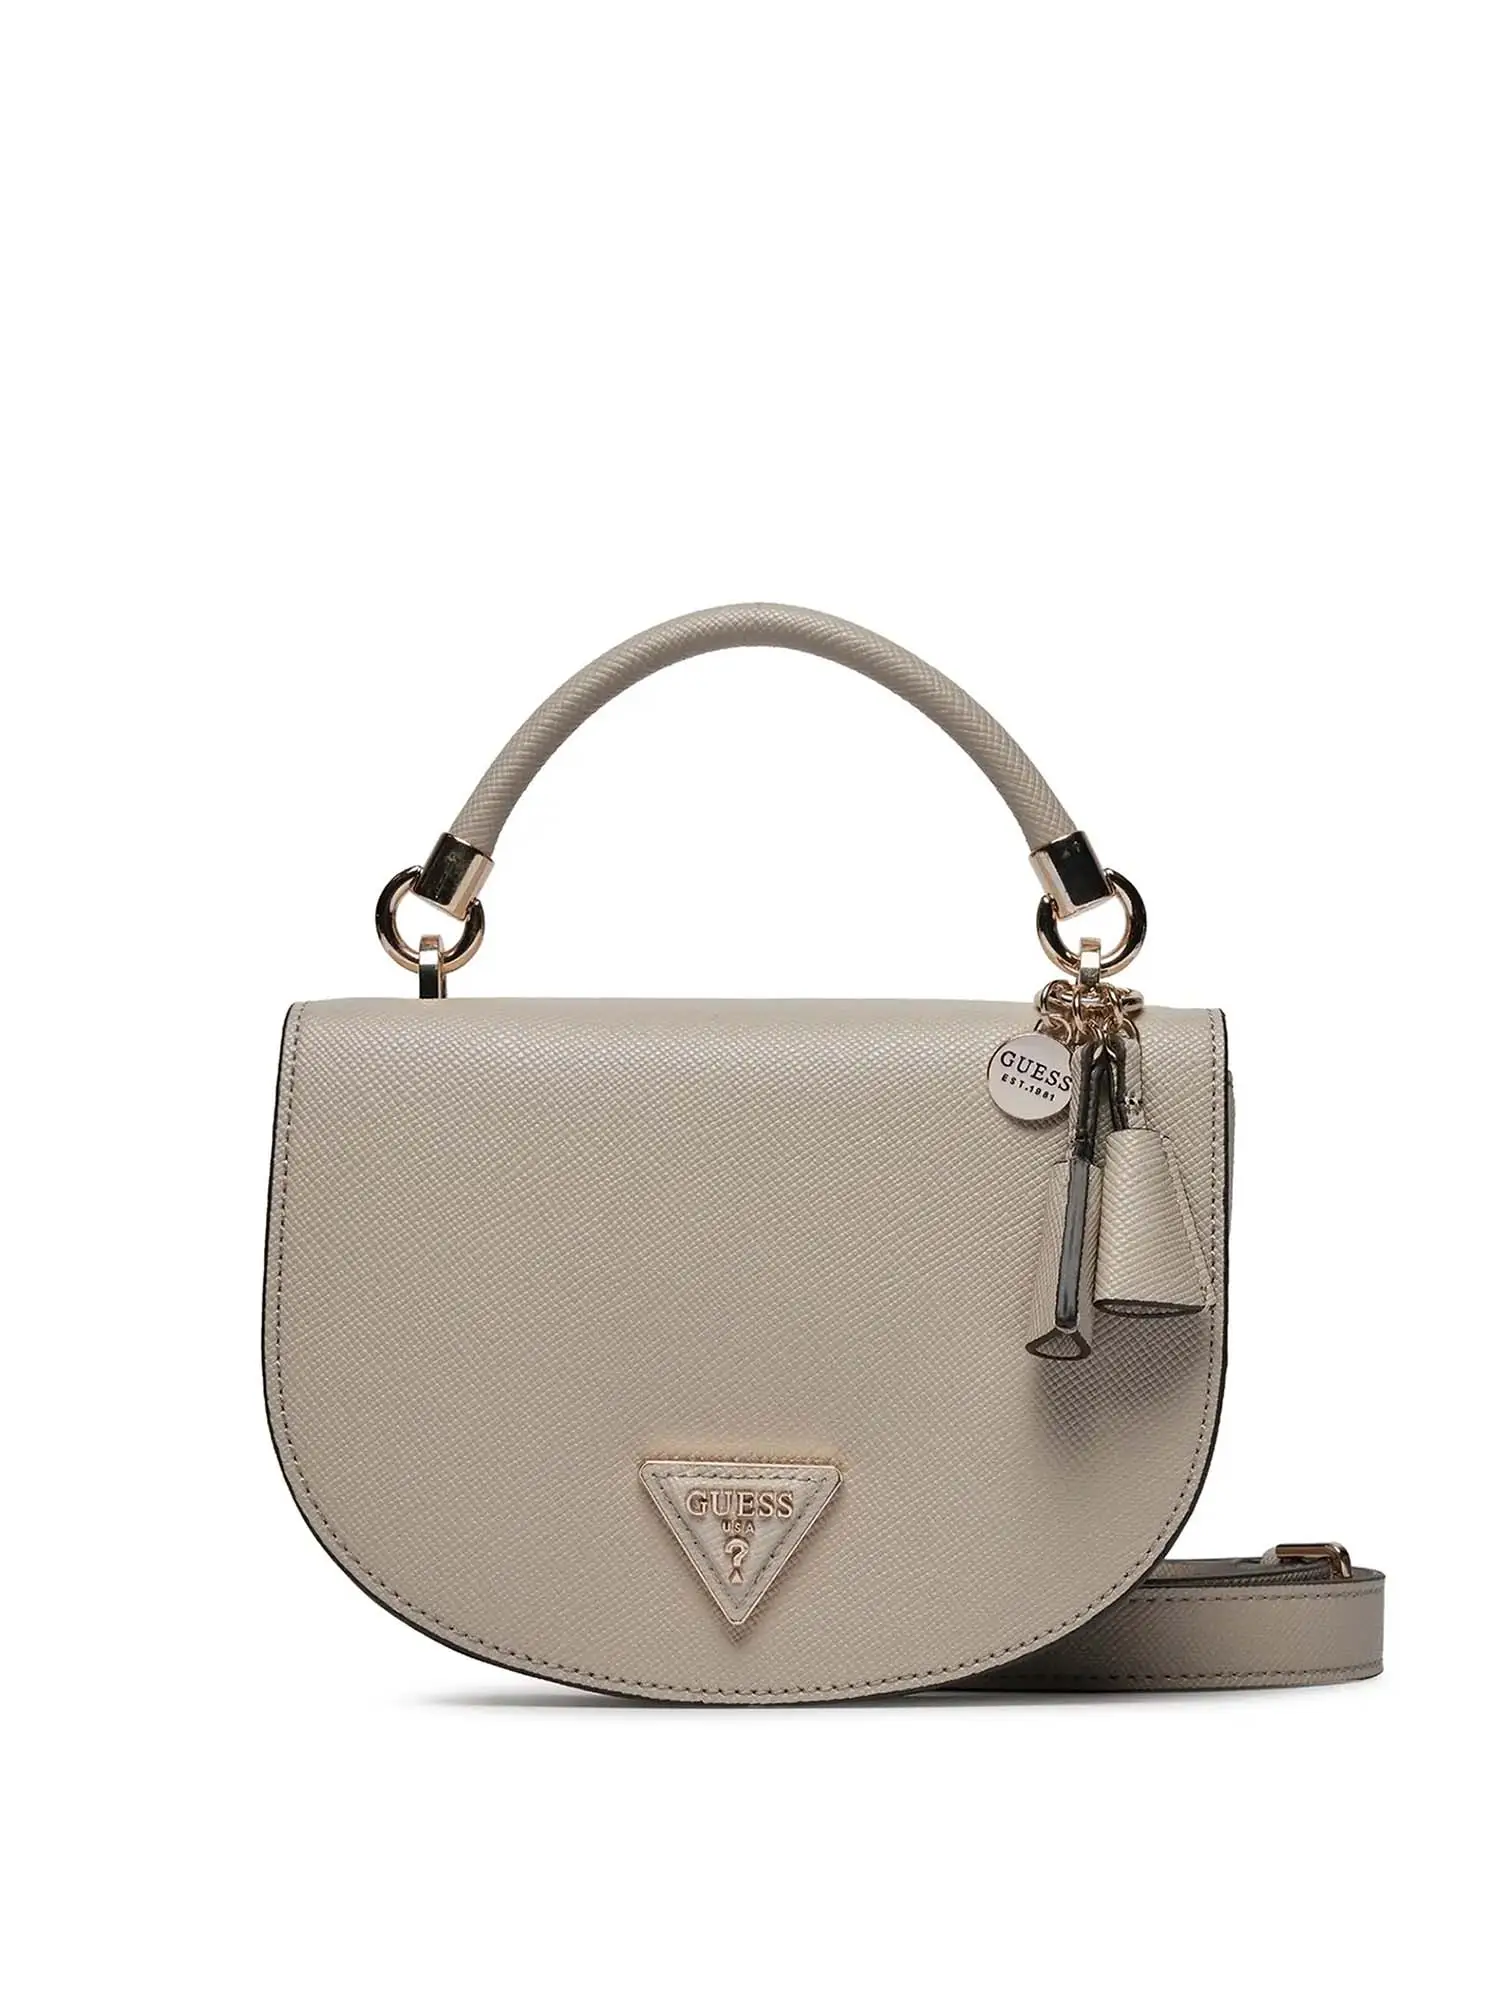 TRACOLLA DONNA - GUESS - HWVG91 95770 - TAUPE, UNICA